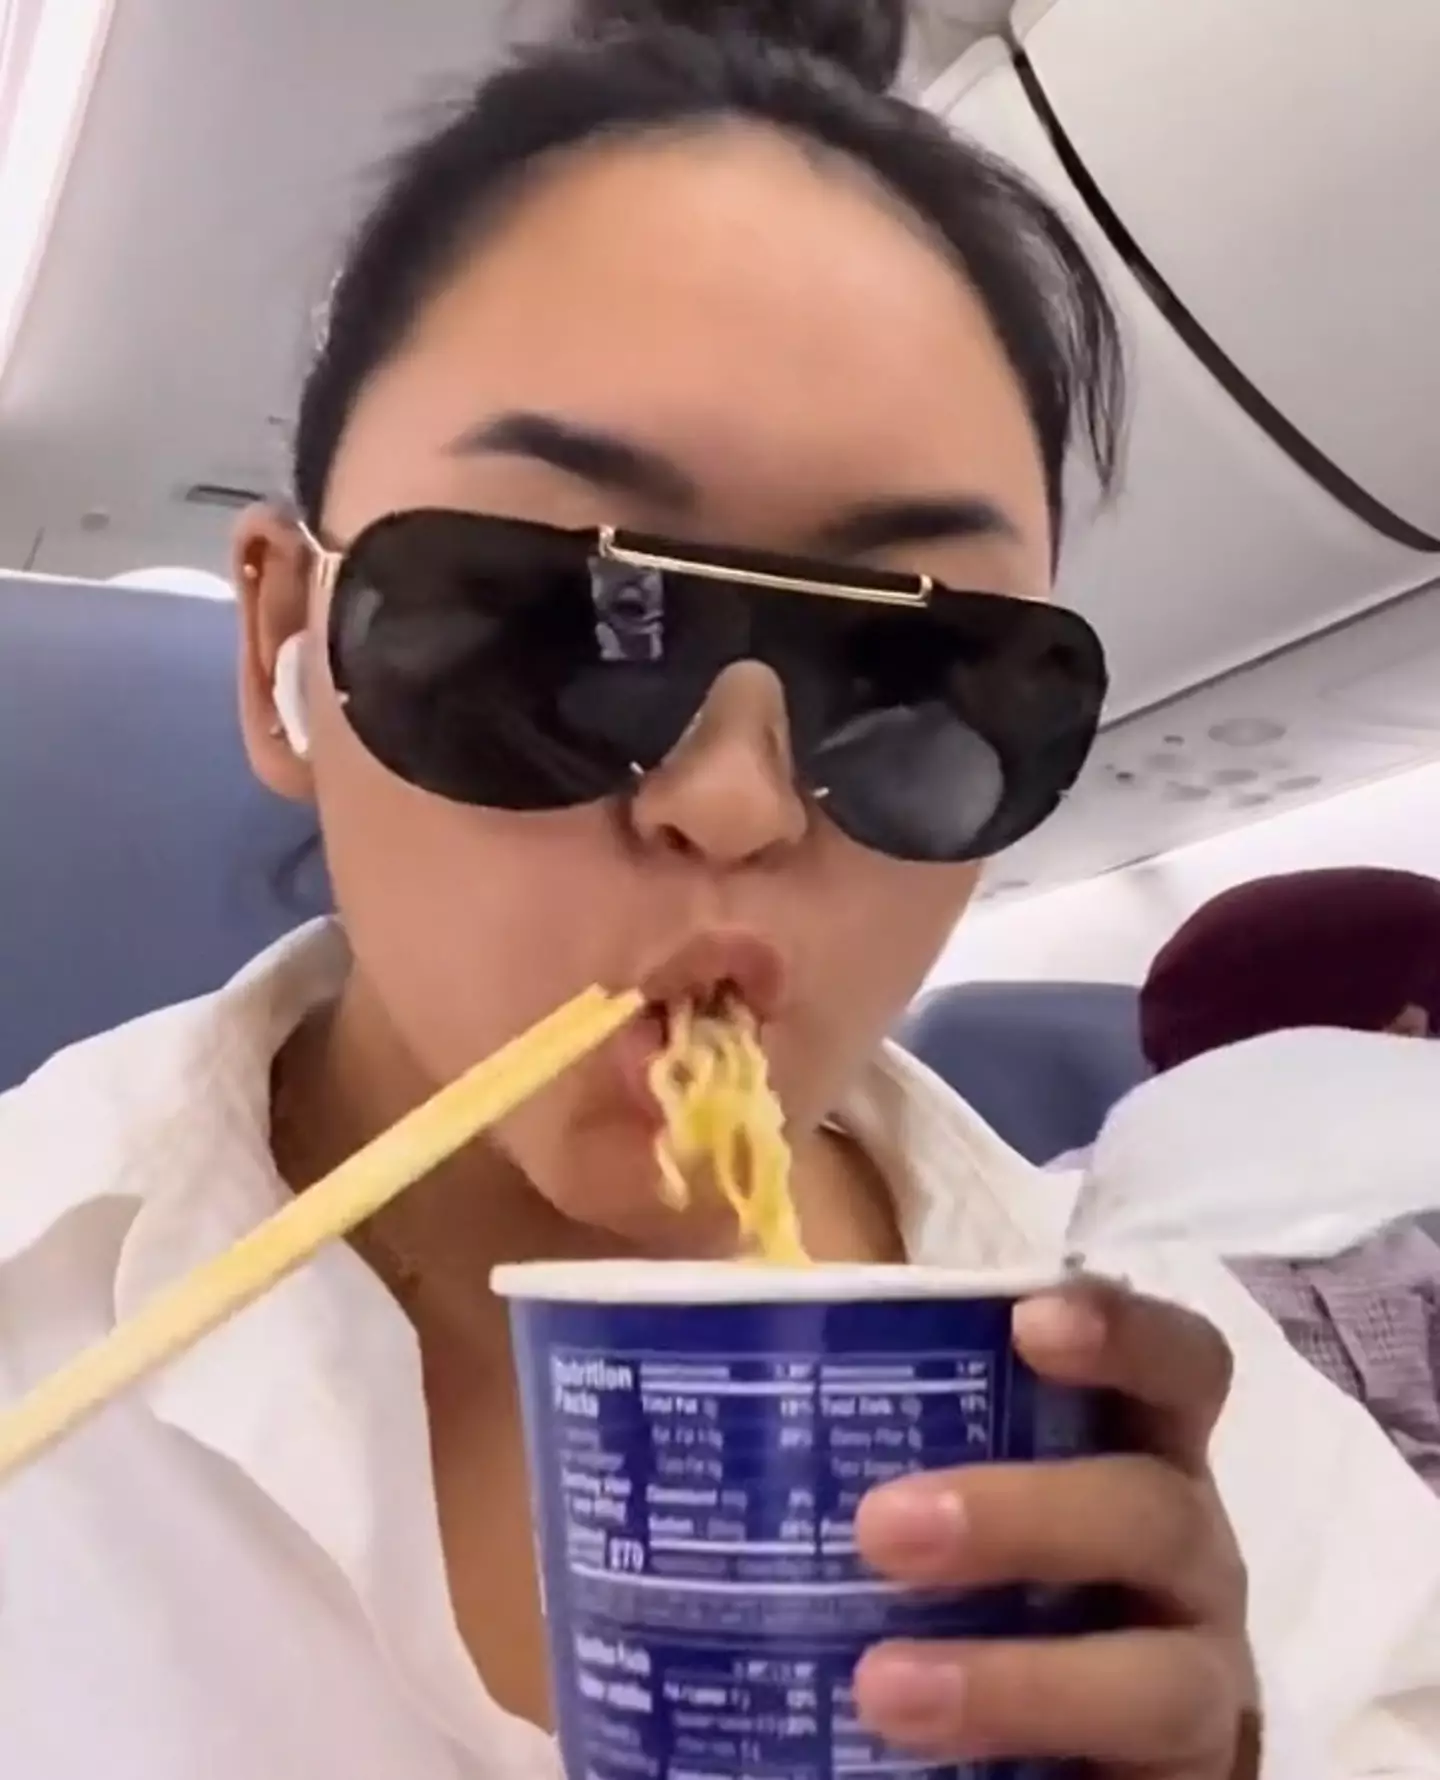 A hot pot of noodles is usually going to be better than whatever meal the plane is serving.